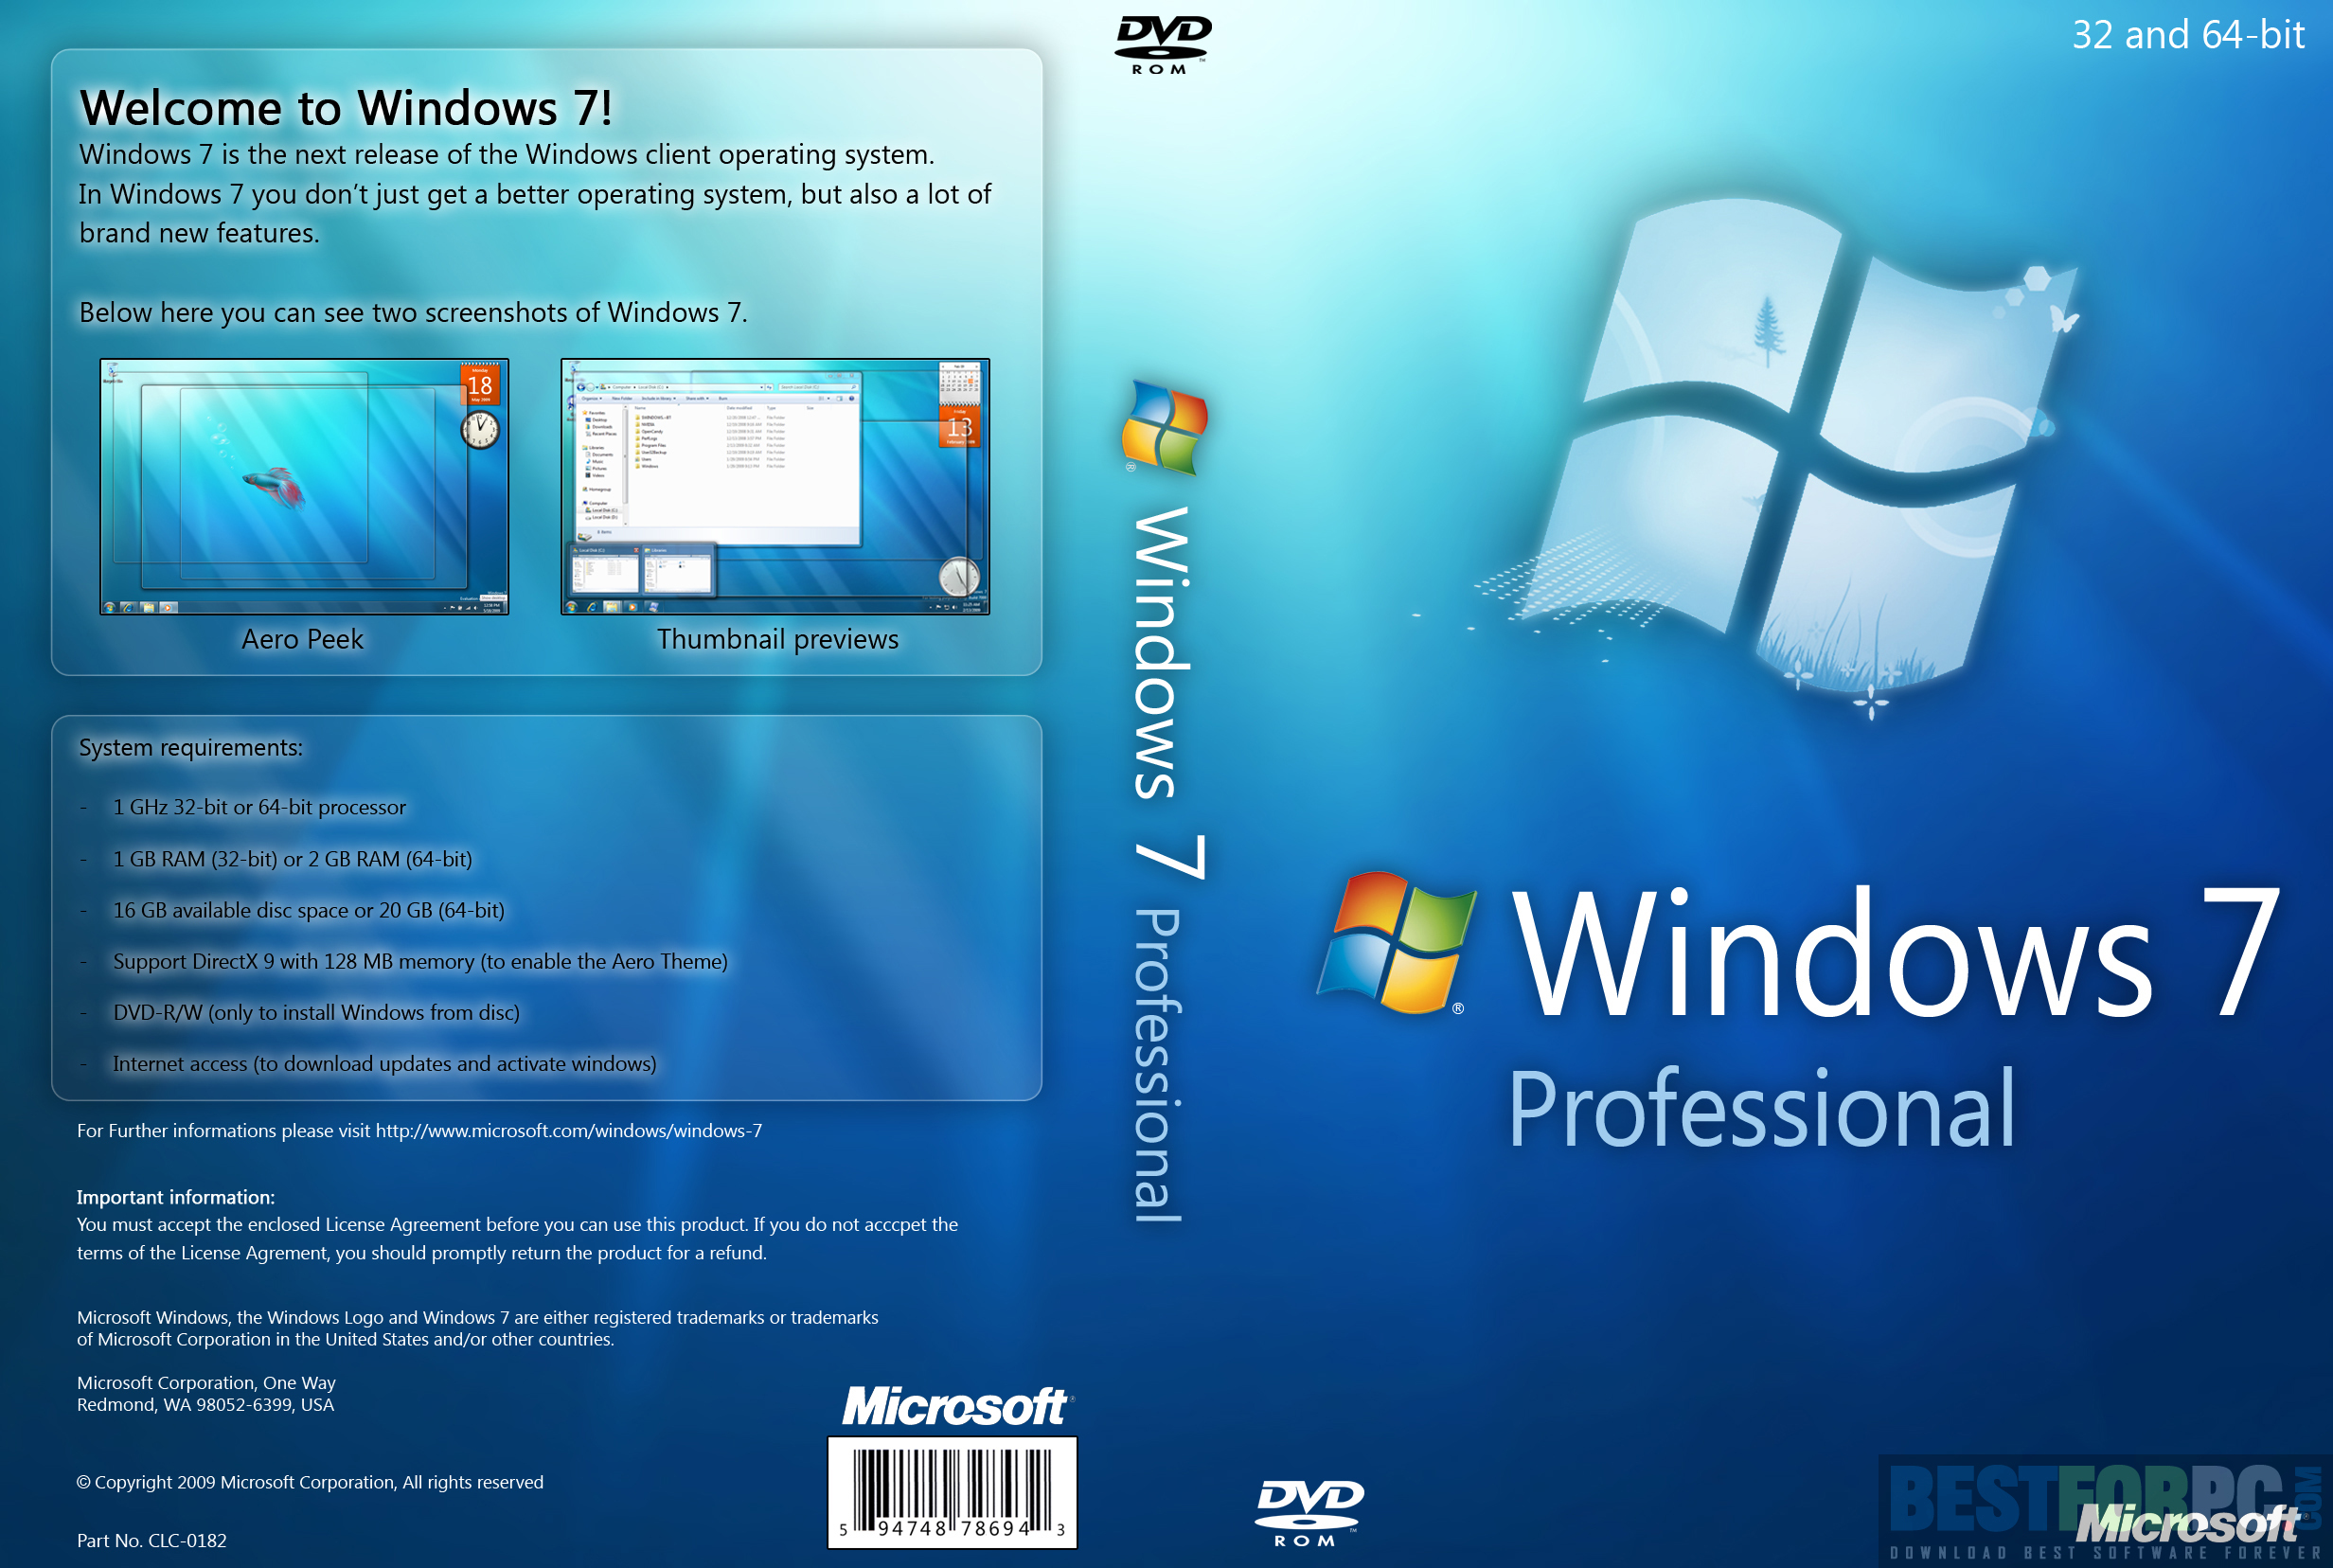 all drivers for windows 7 64 bit